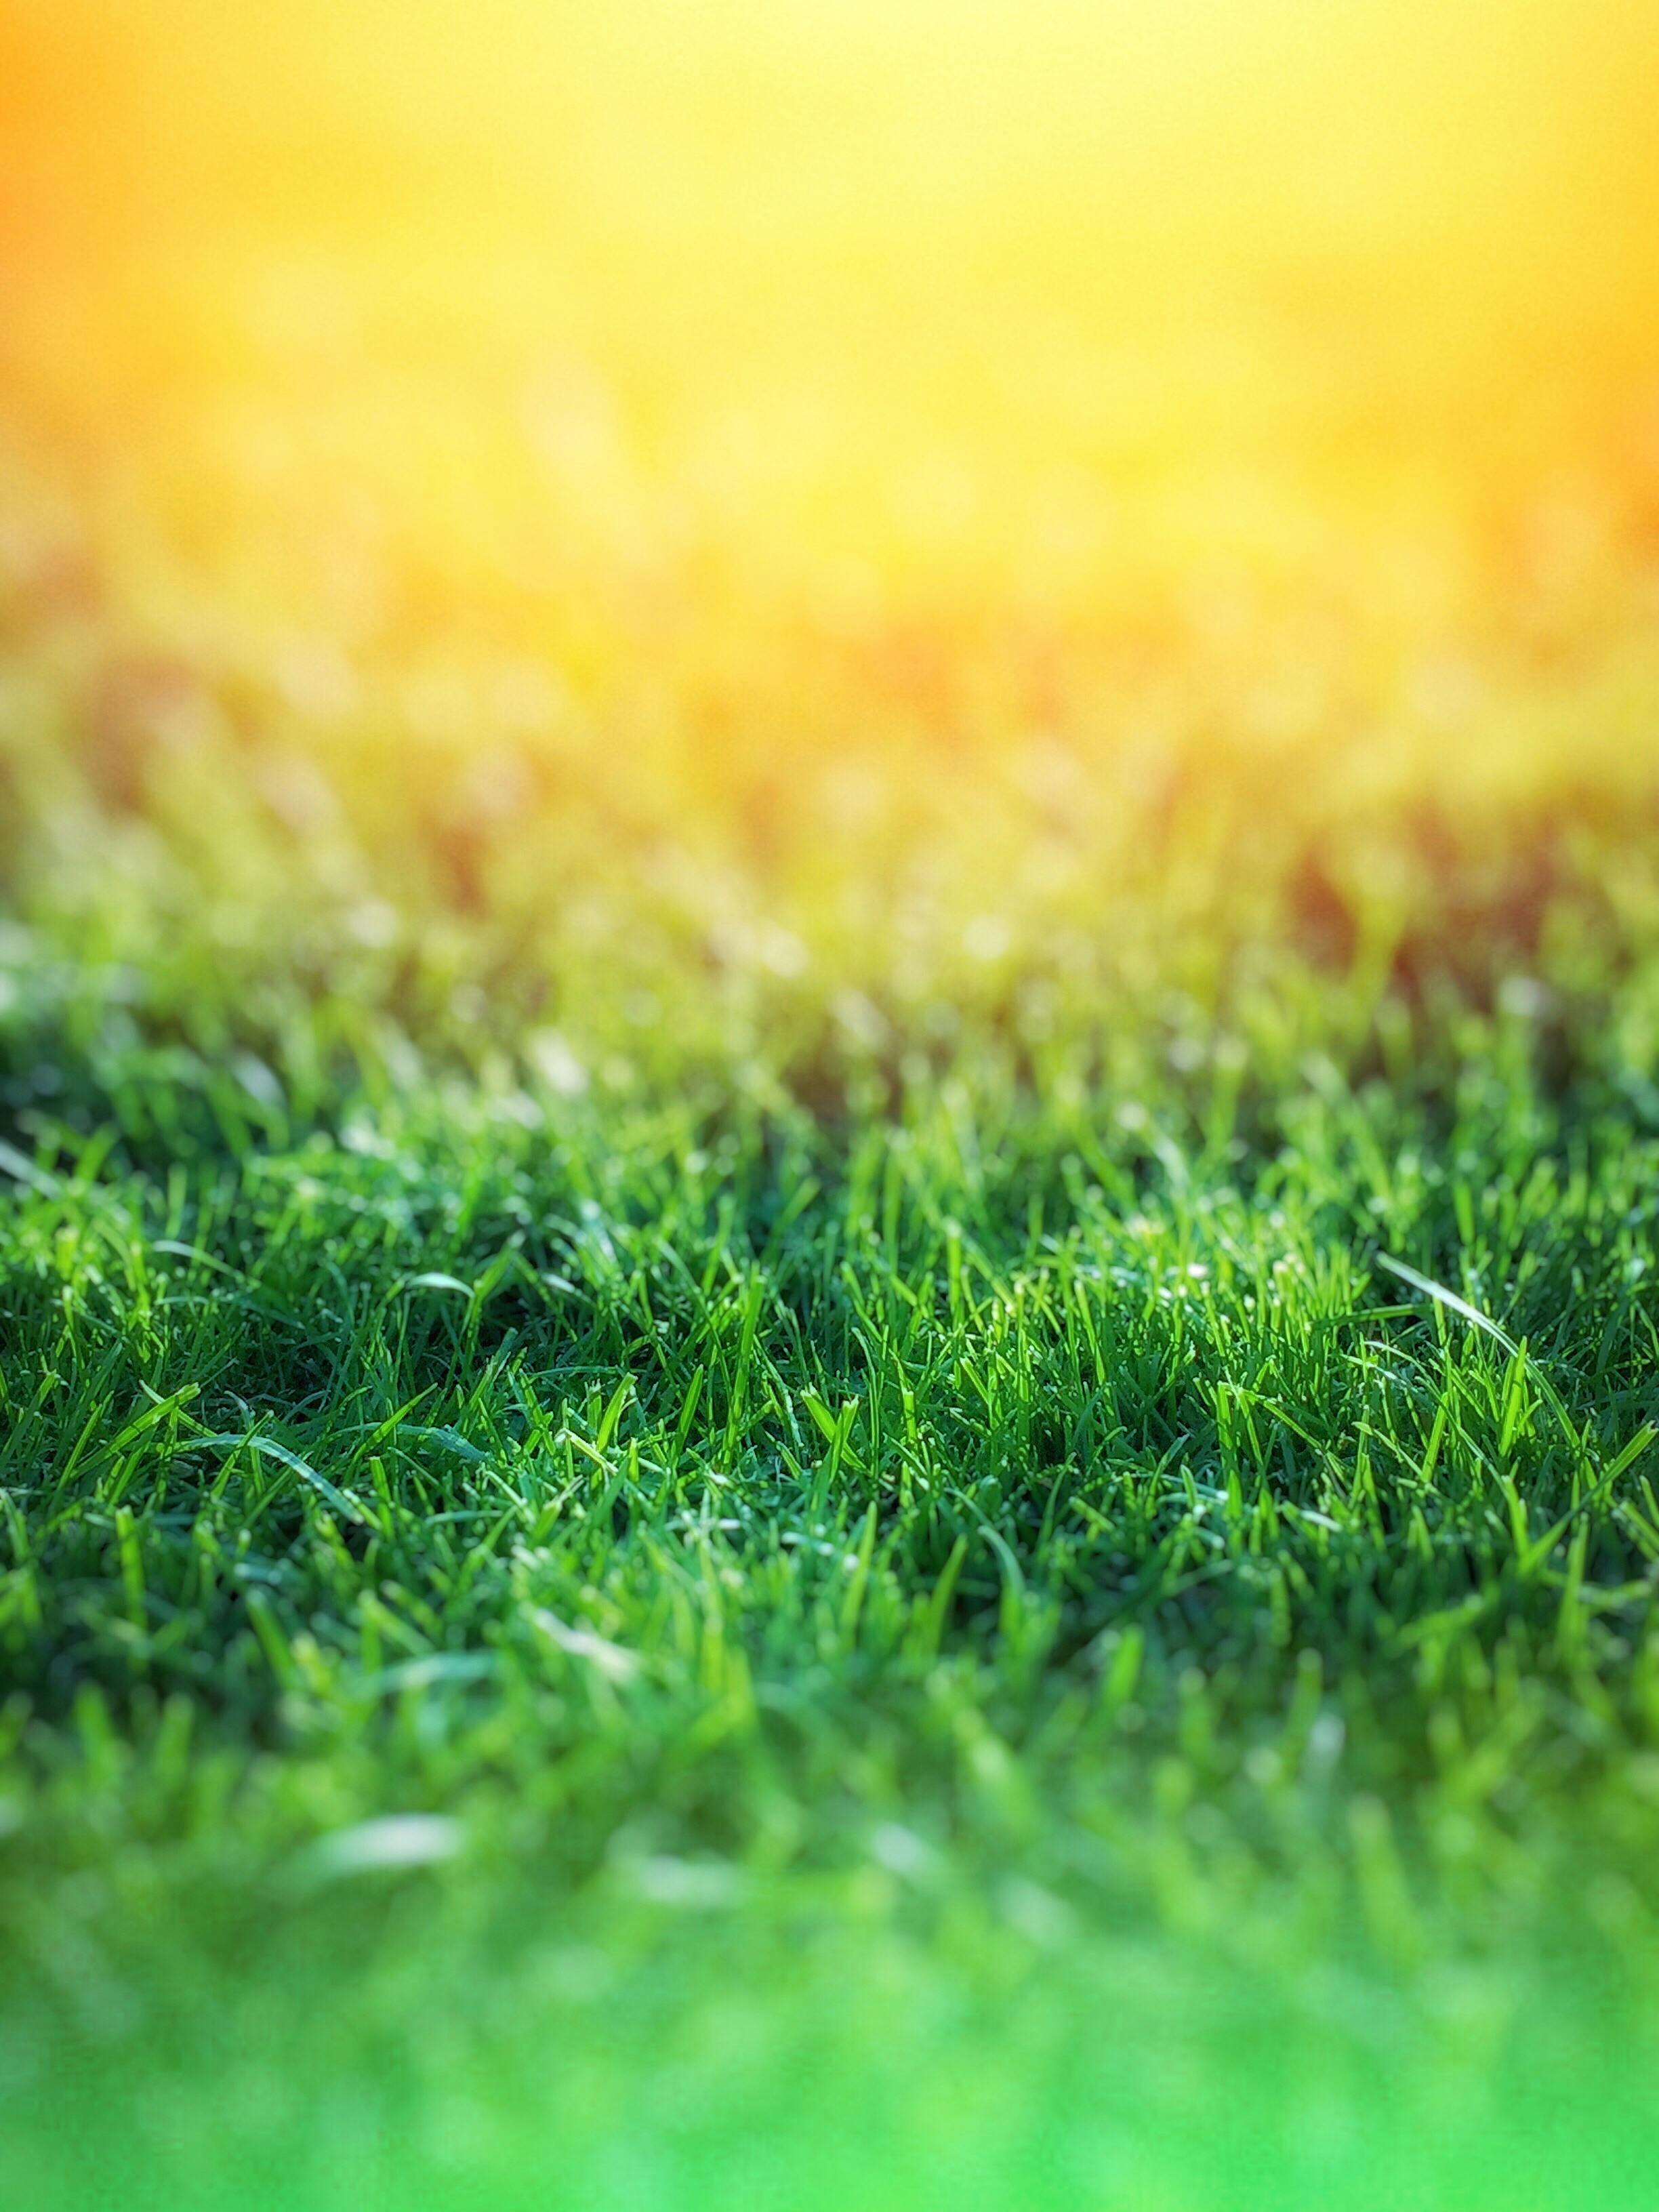 Green Grass Over Yellow Background Free Stock Photo